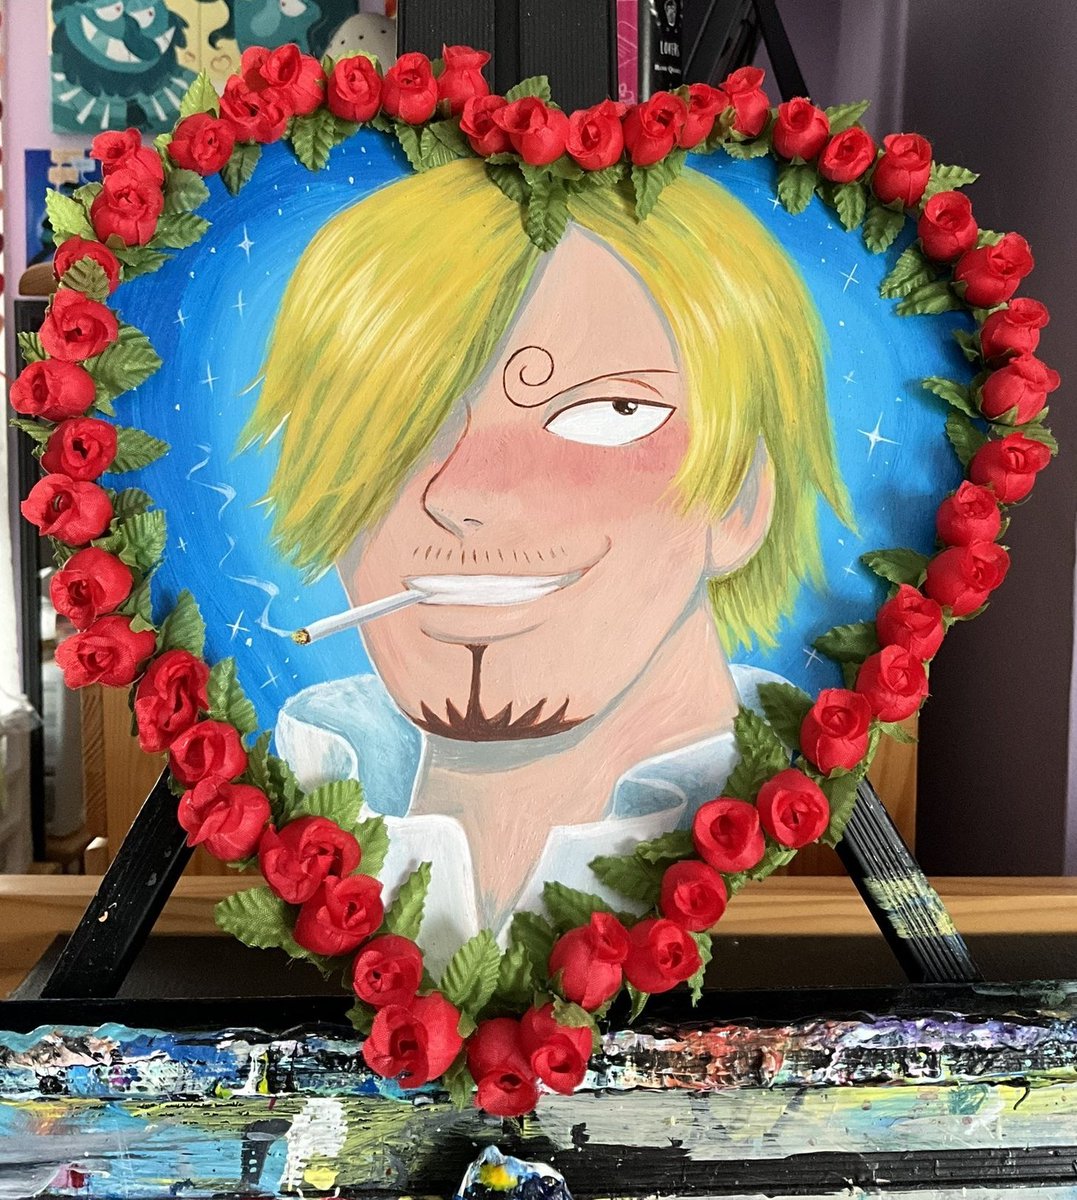 Happy Birthday to my dearest sis @TiesandFedoras !!!!!💙💛🥰 love you so much! you're my best friend and you deserve the world (+ Sanji as your personal chef!)